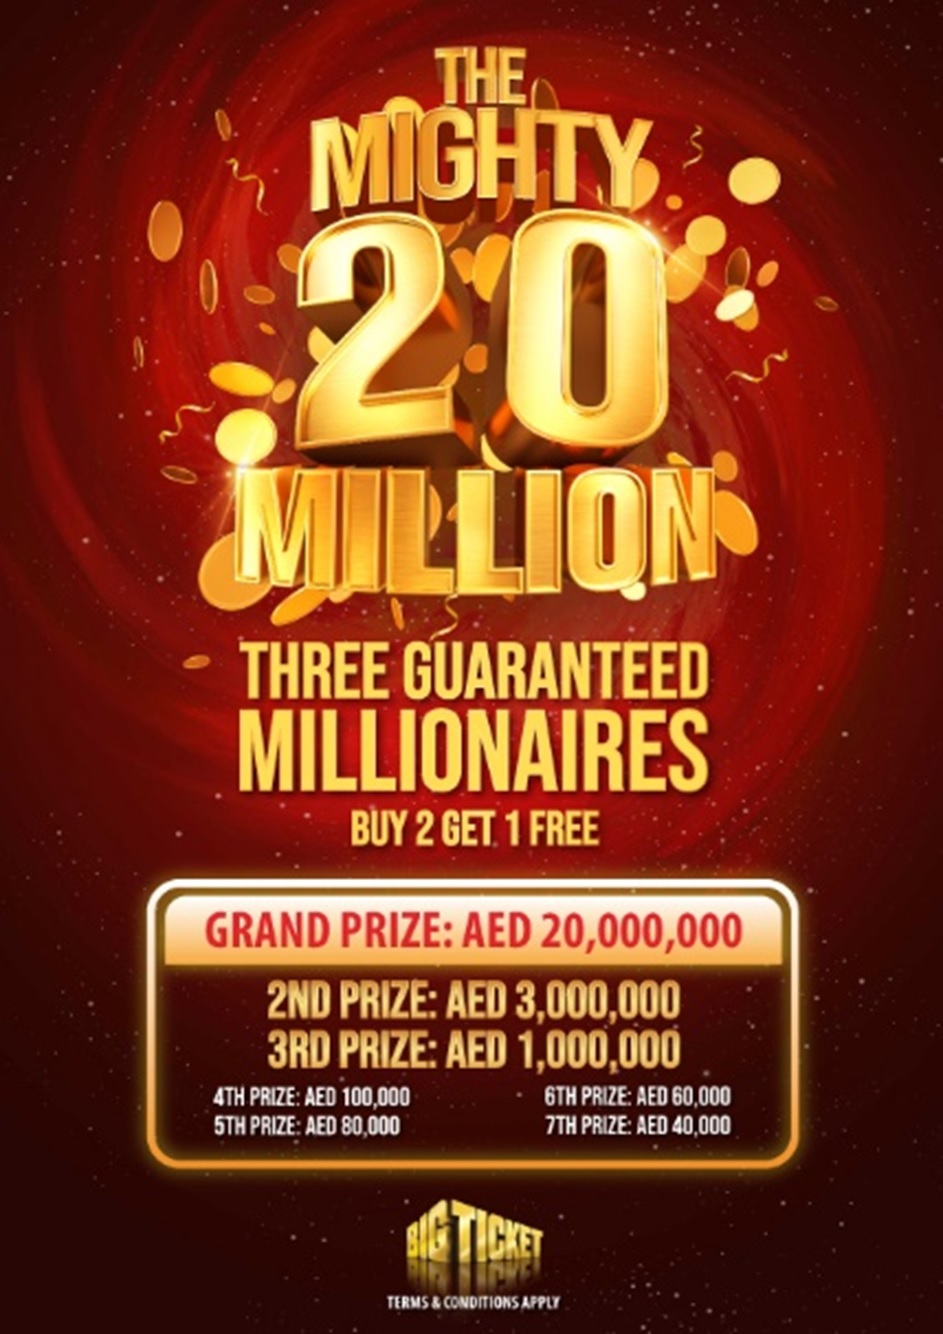 Big Ticket announces AED 20M grand prize for December 2020 promo The